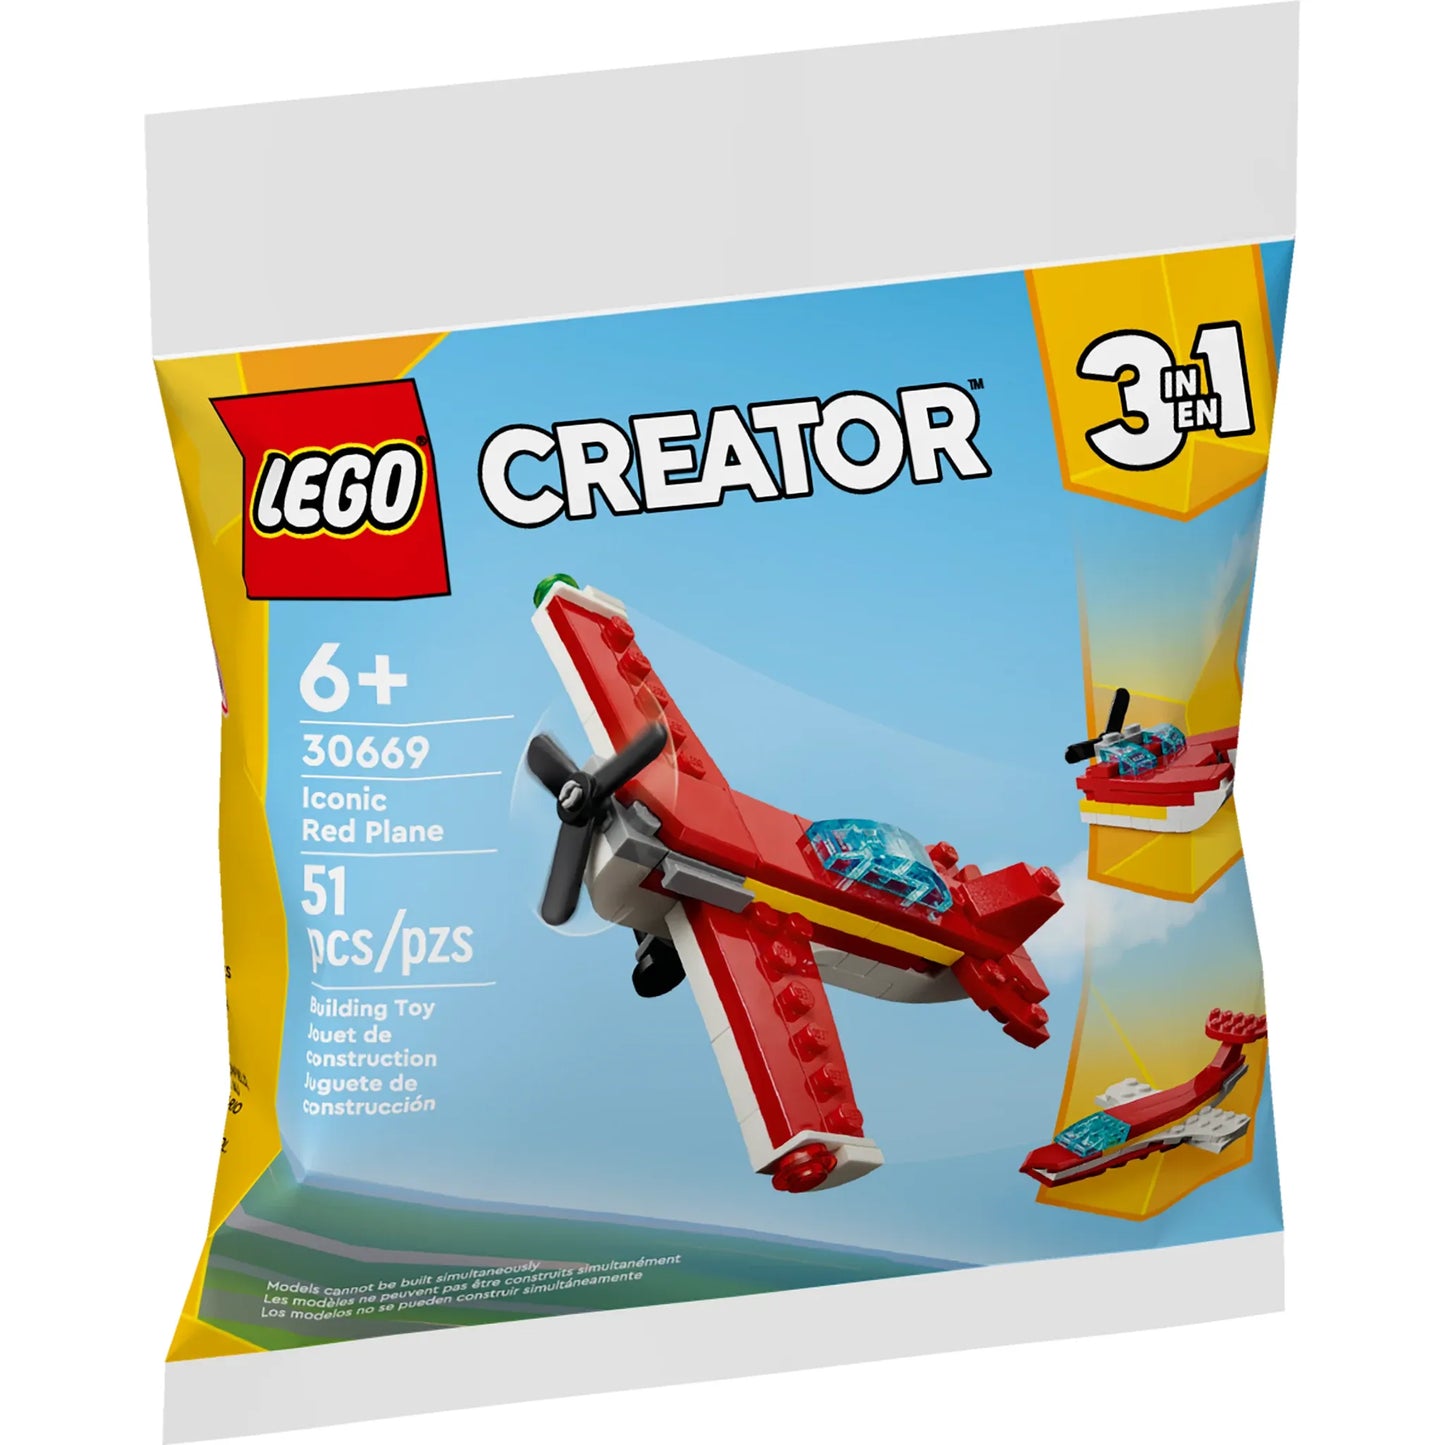 Creator: Iconic Red Plane Building Pack